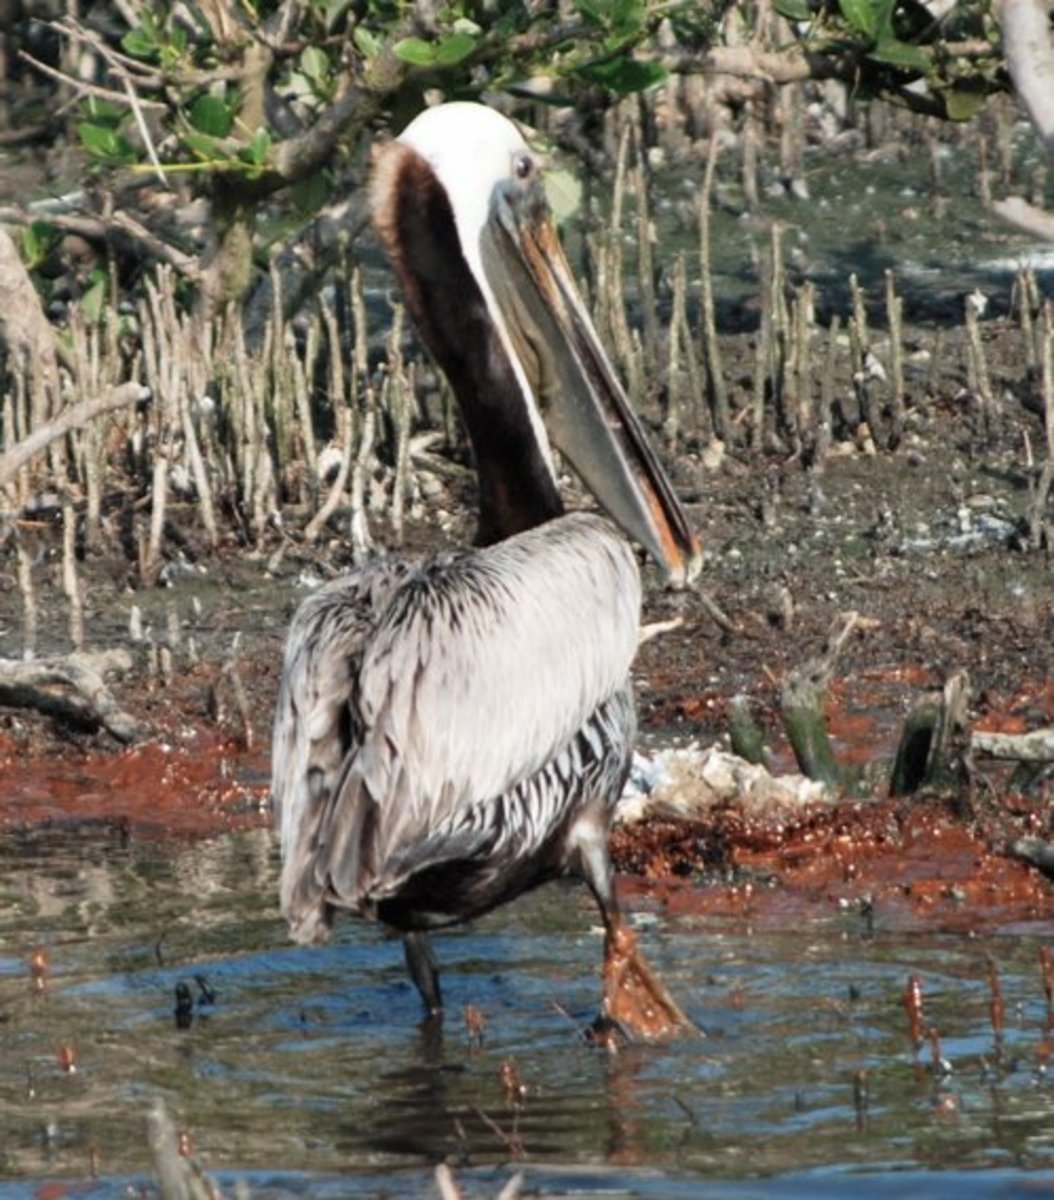 It is now a felony to take more photos of birds like this, wading through oil that broken booms have trapped in rookeries